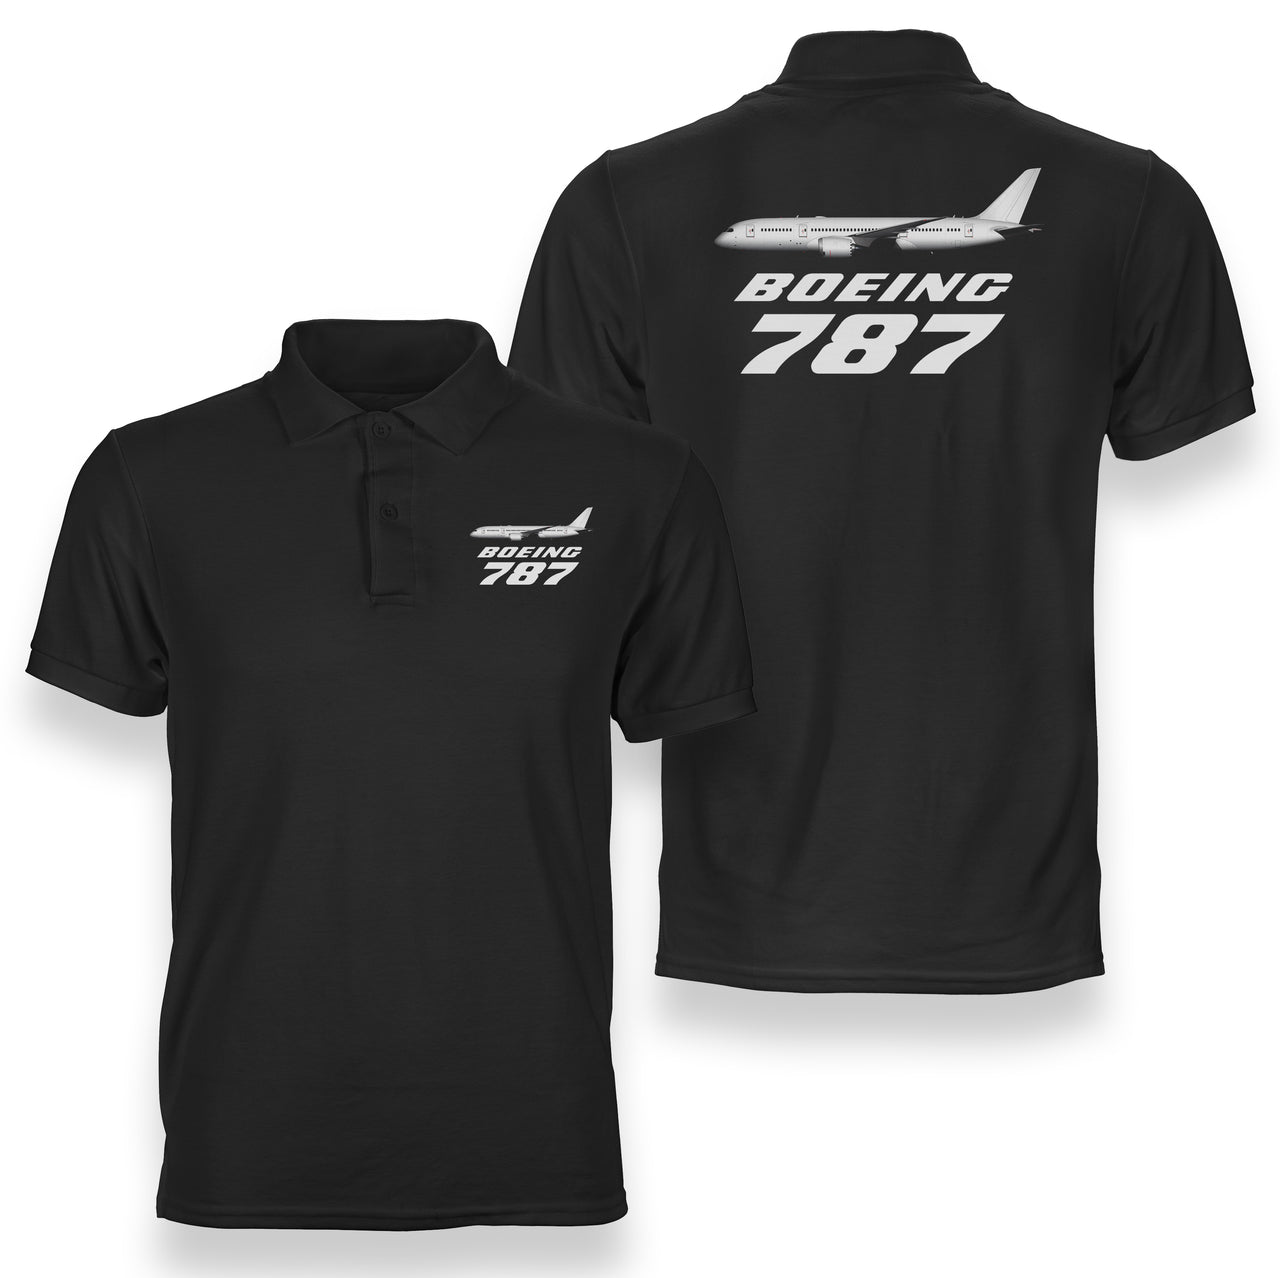 The Boeing 787 Designed Double Side Polo T-Shirts